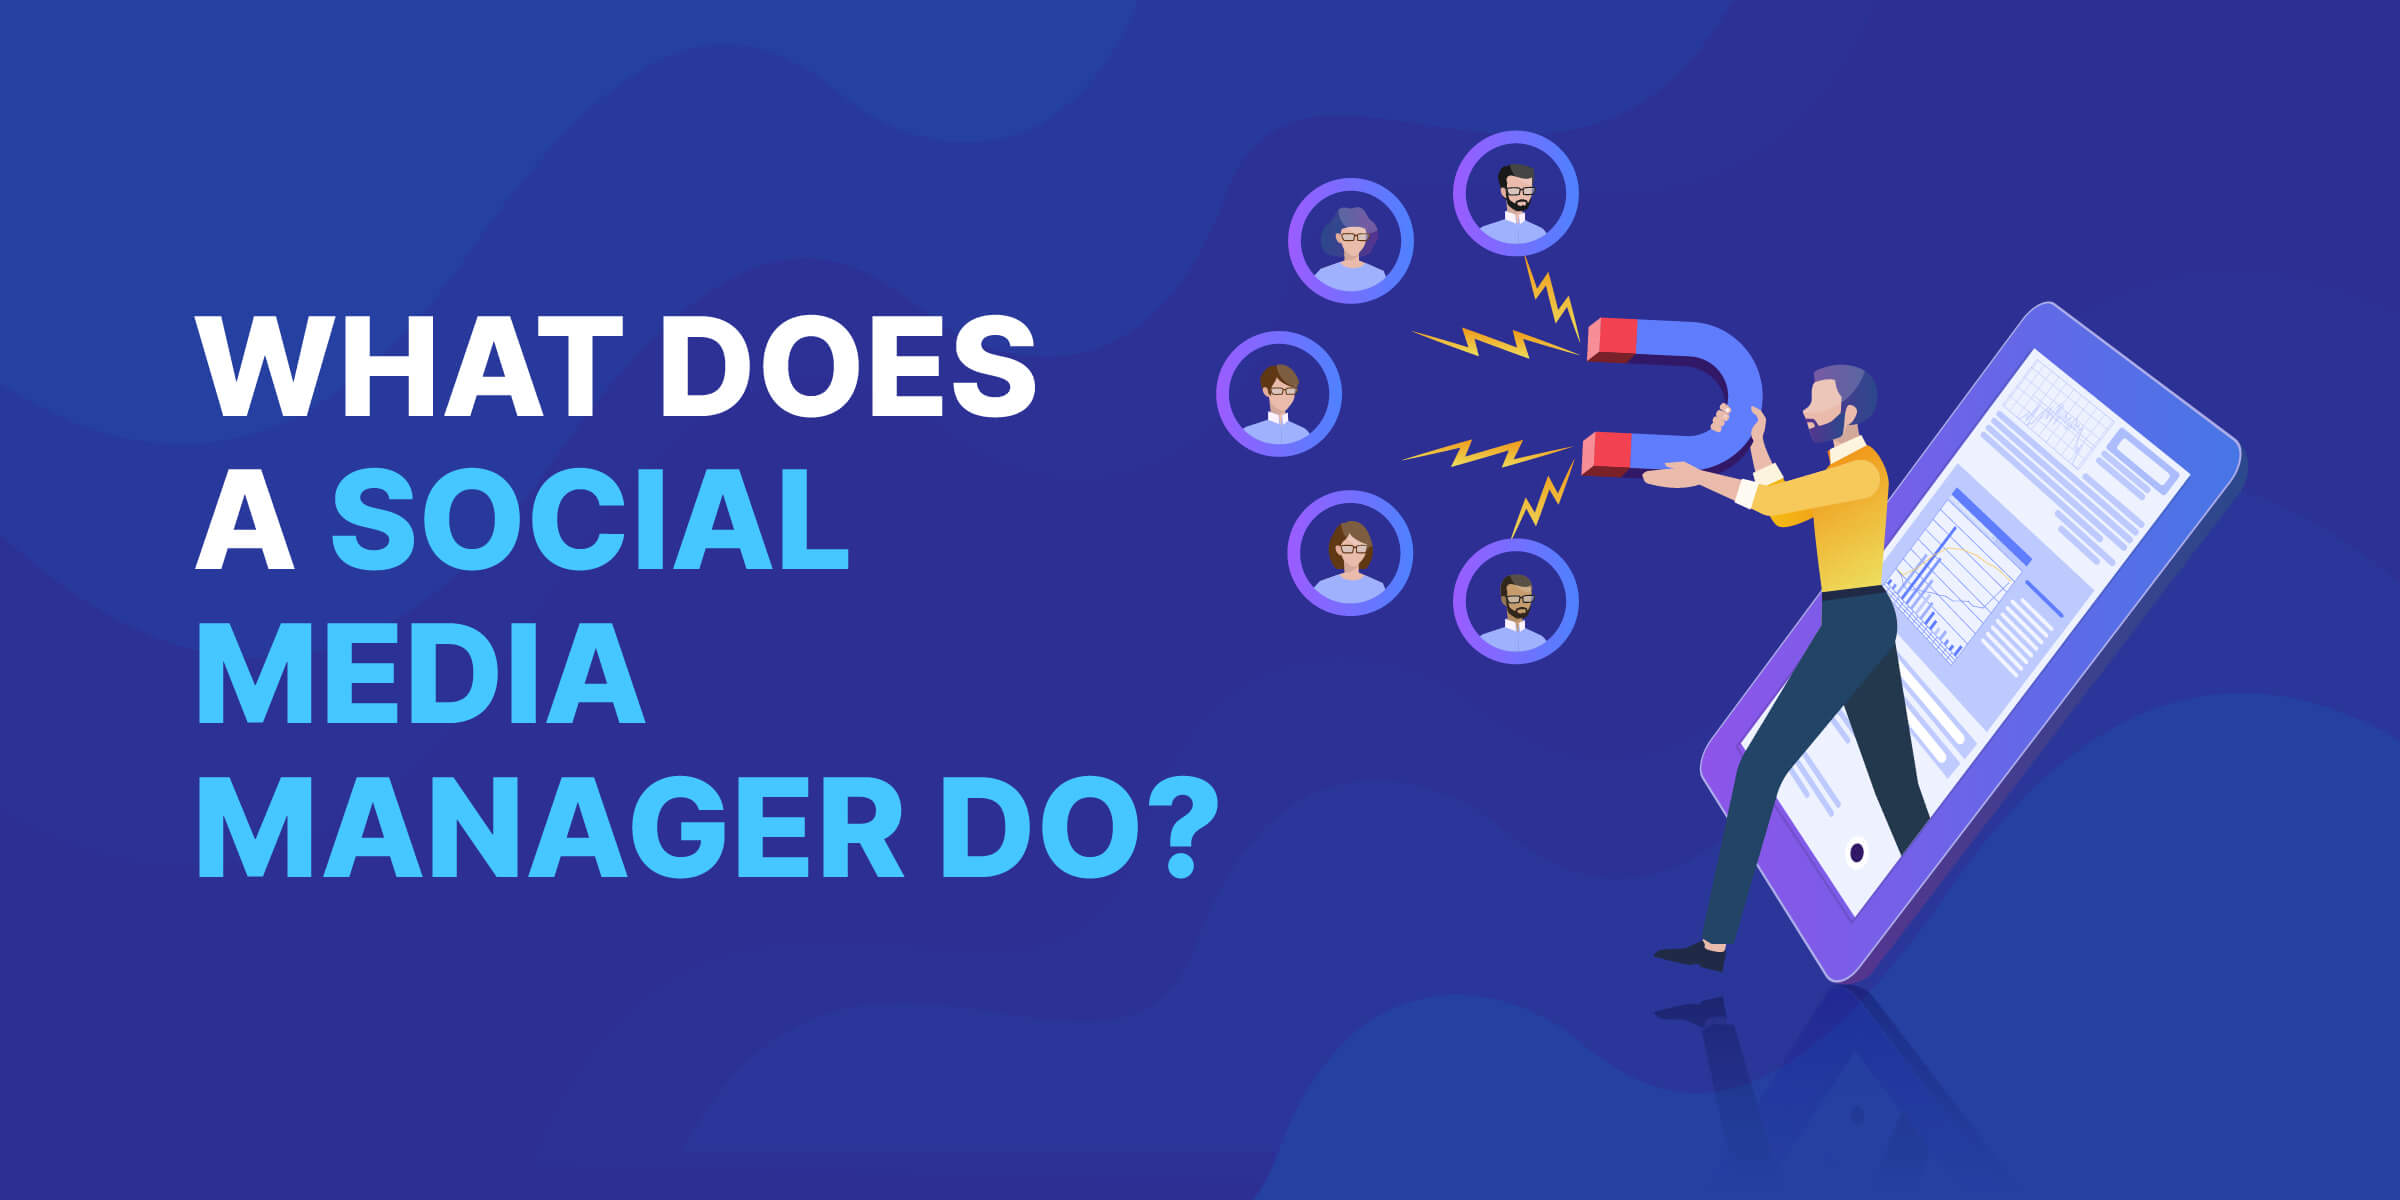 What Does a Social Media Manager Do